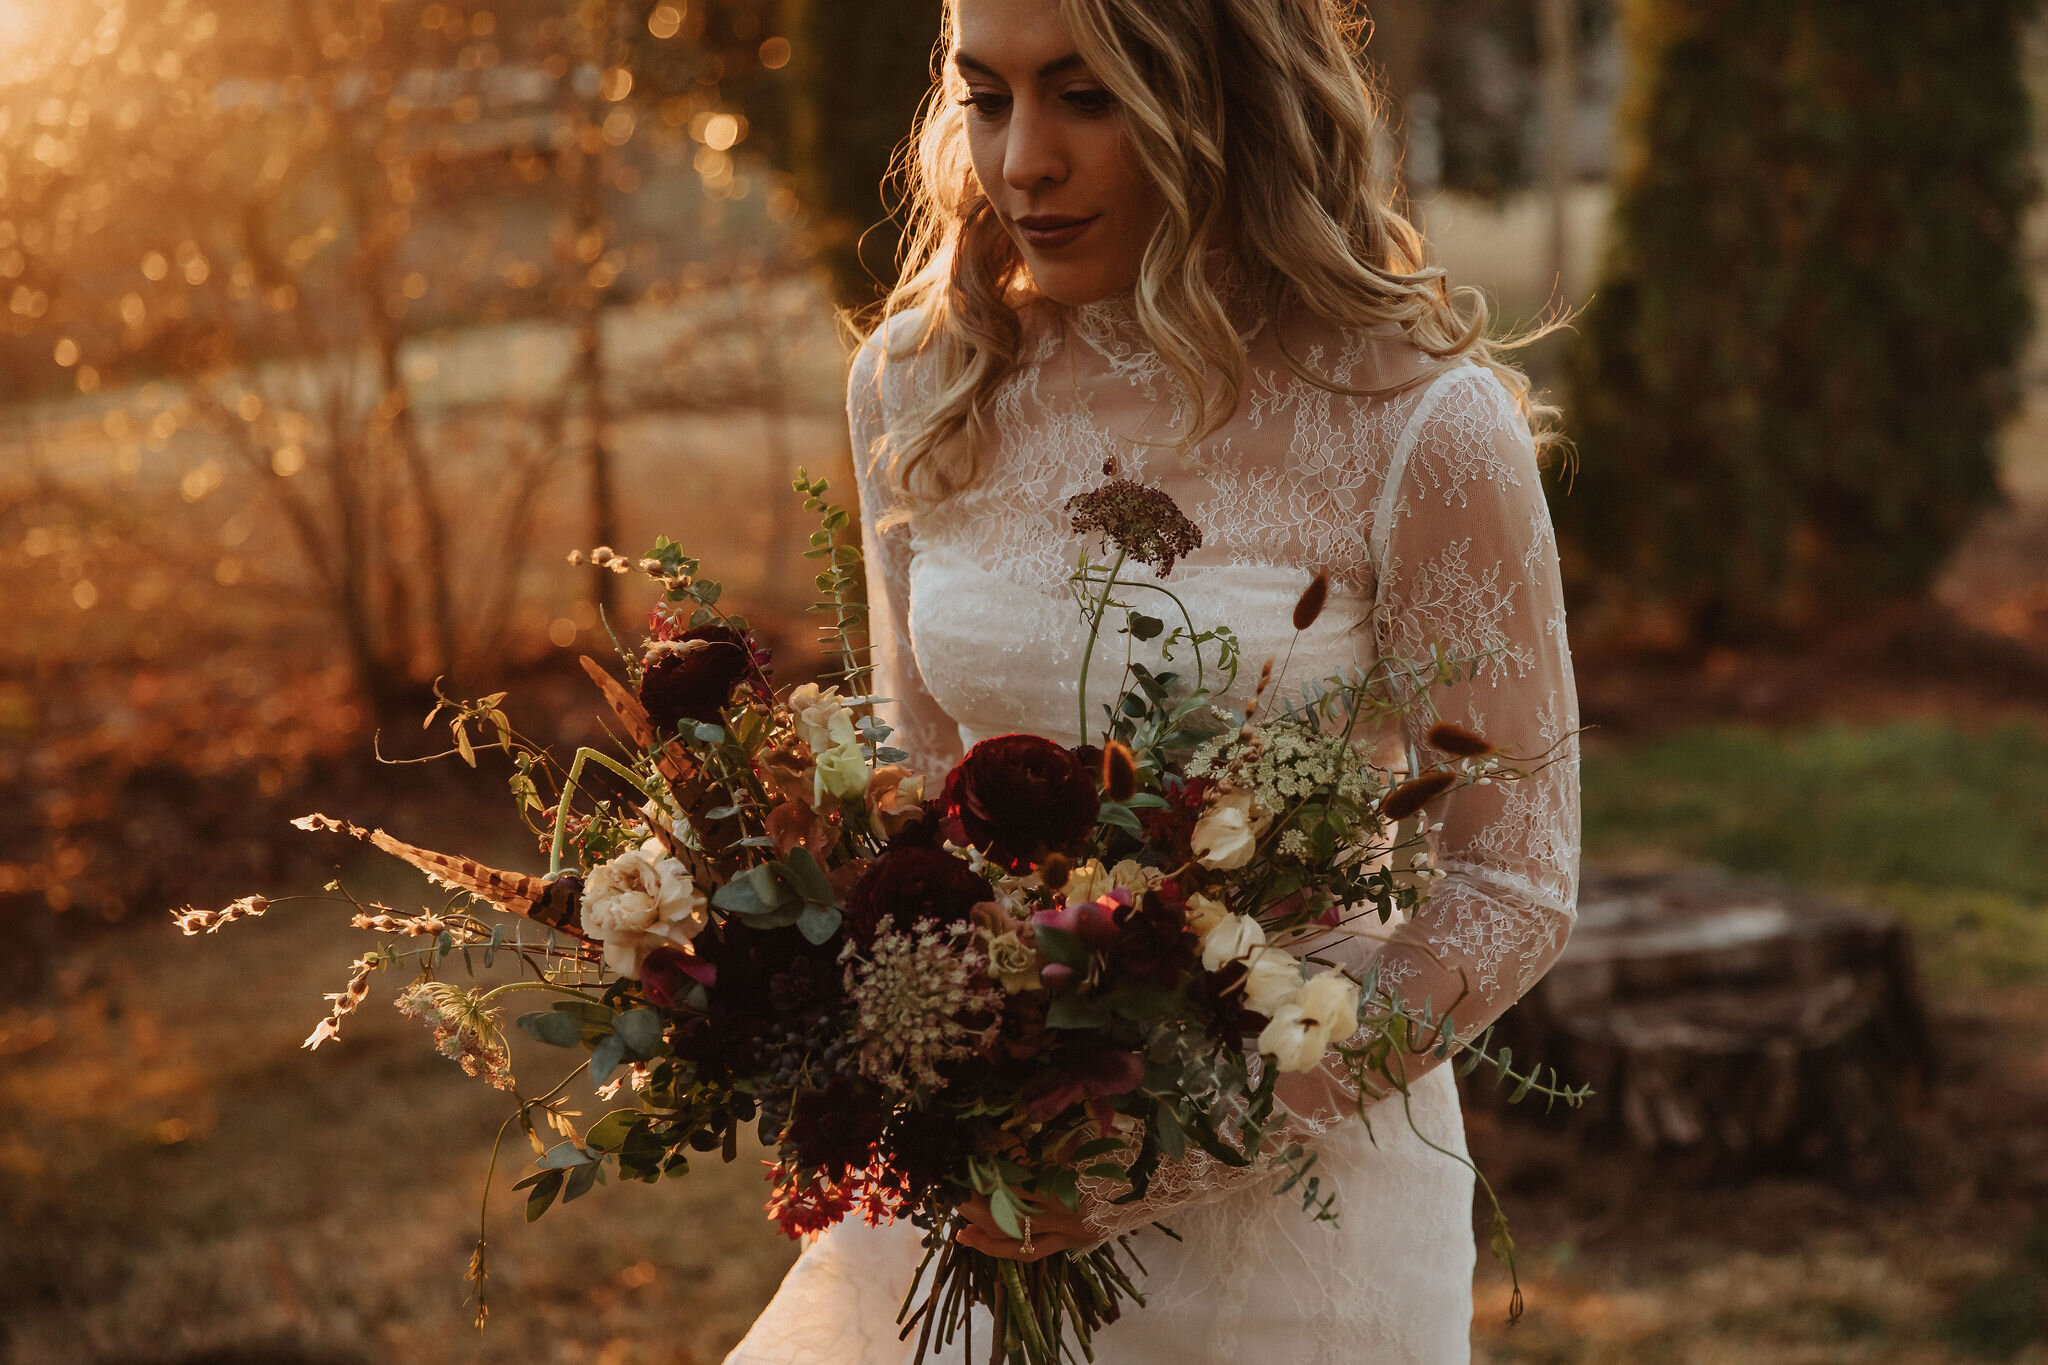 A perfect botanical and moody Bridal bouquet filled with Chocolate Cosmos, Queen Ann's Lace, Baby Eucalyptus, Rust Bunny Tails, Festival Bush, Antique Carnations, Burgundy Ranunculus, and Brown Lisianthus. Designed by Nashville wedding floral design…